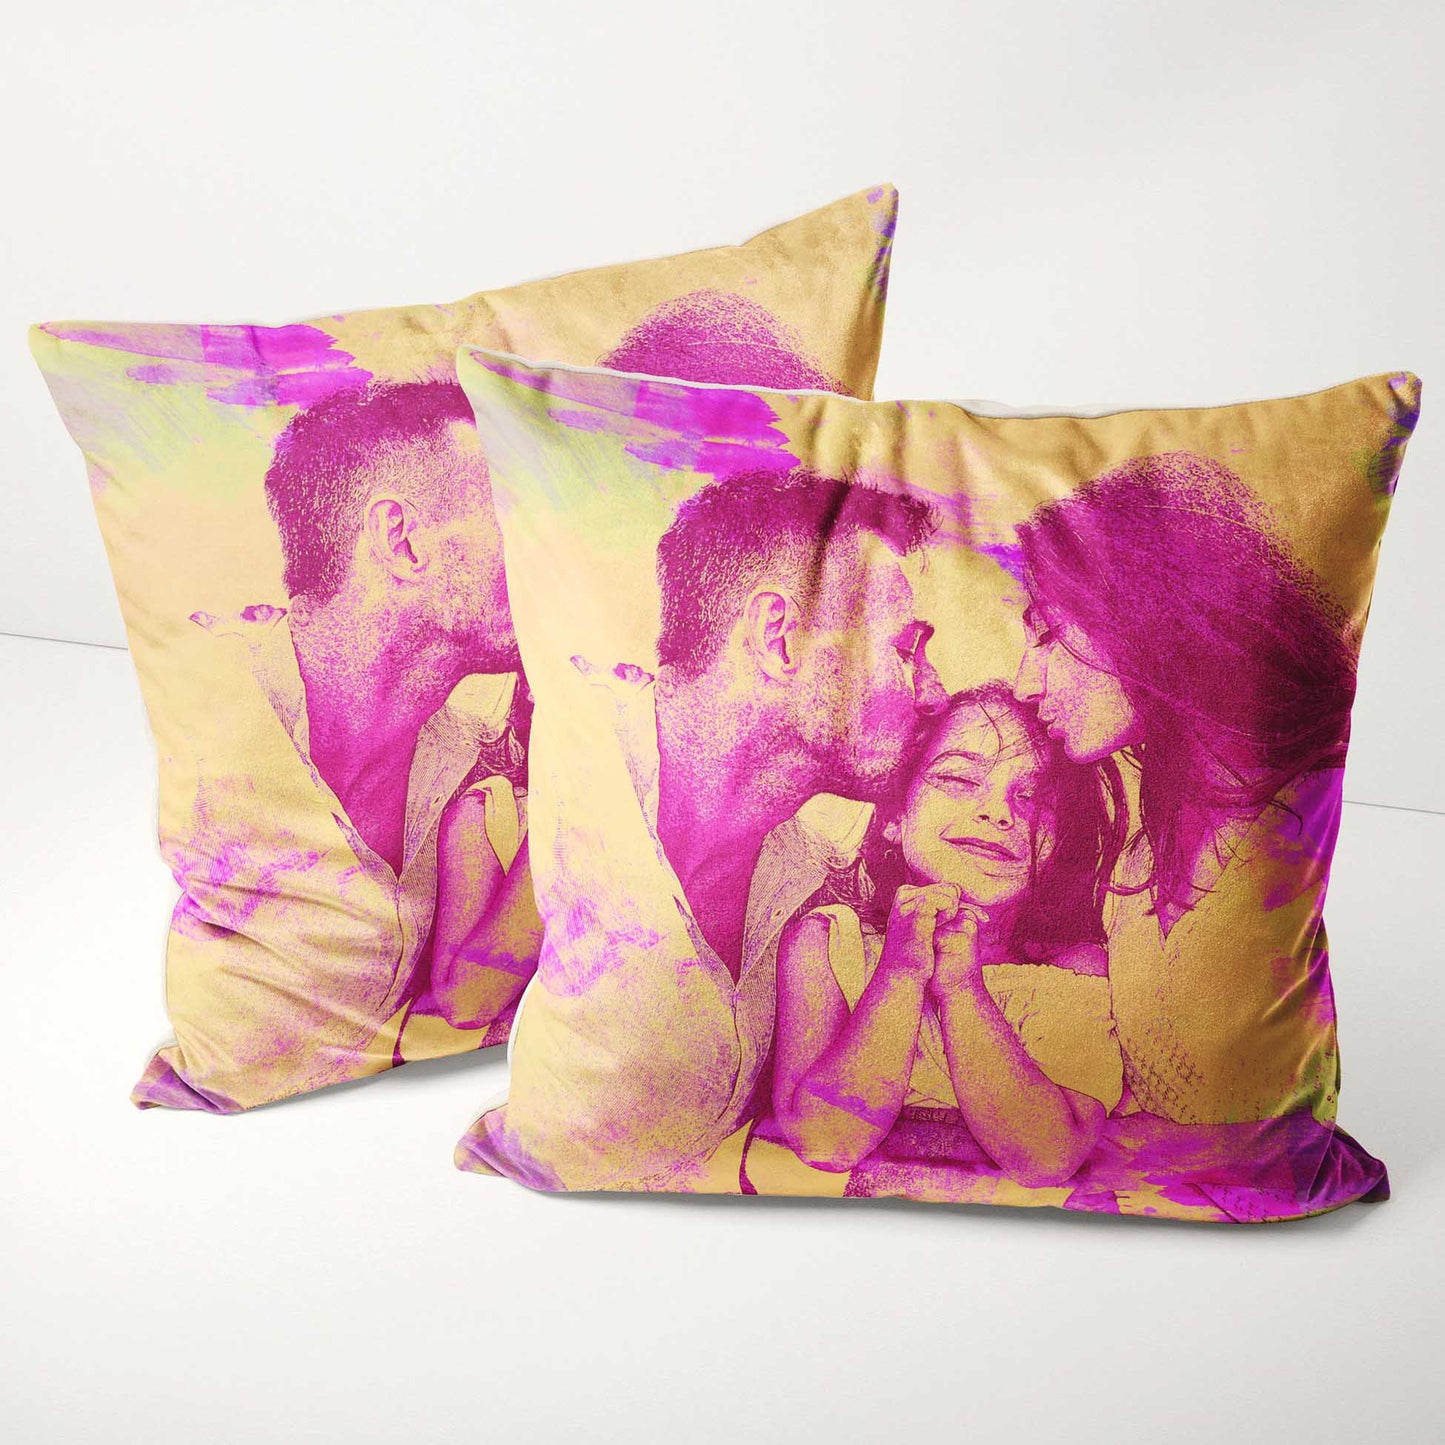 Add a touch of artistic flair to your decor with the Personalised Pink and Yellow Watercolour Cushion. Handcrafted with care, this soft velvet cushion showcases an original watercolour artwork with beautiful brush strokes